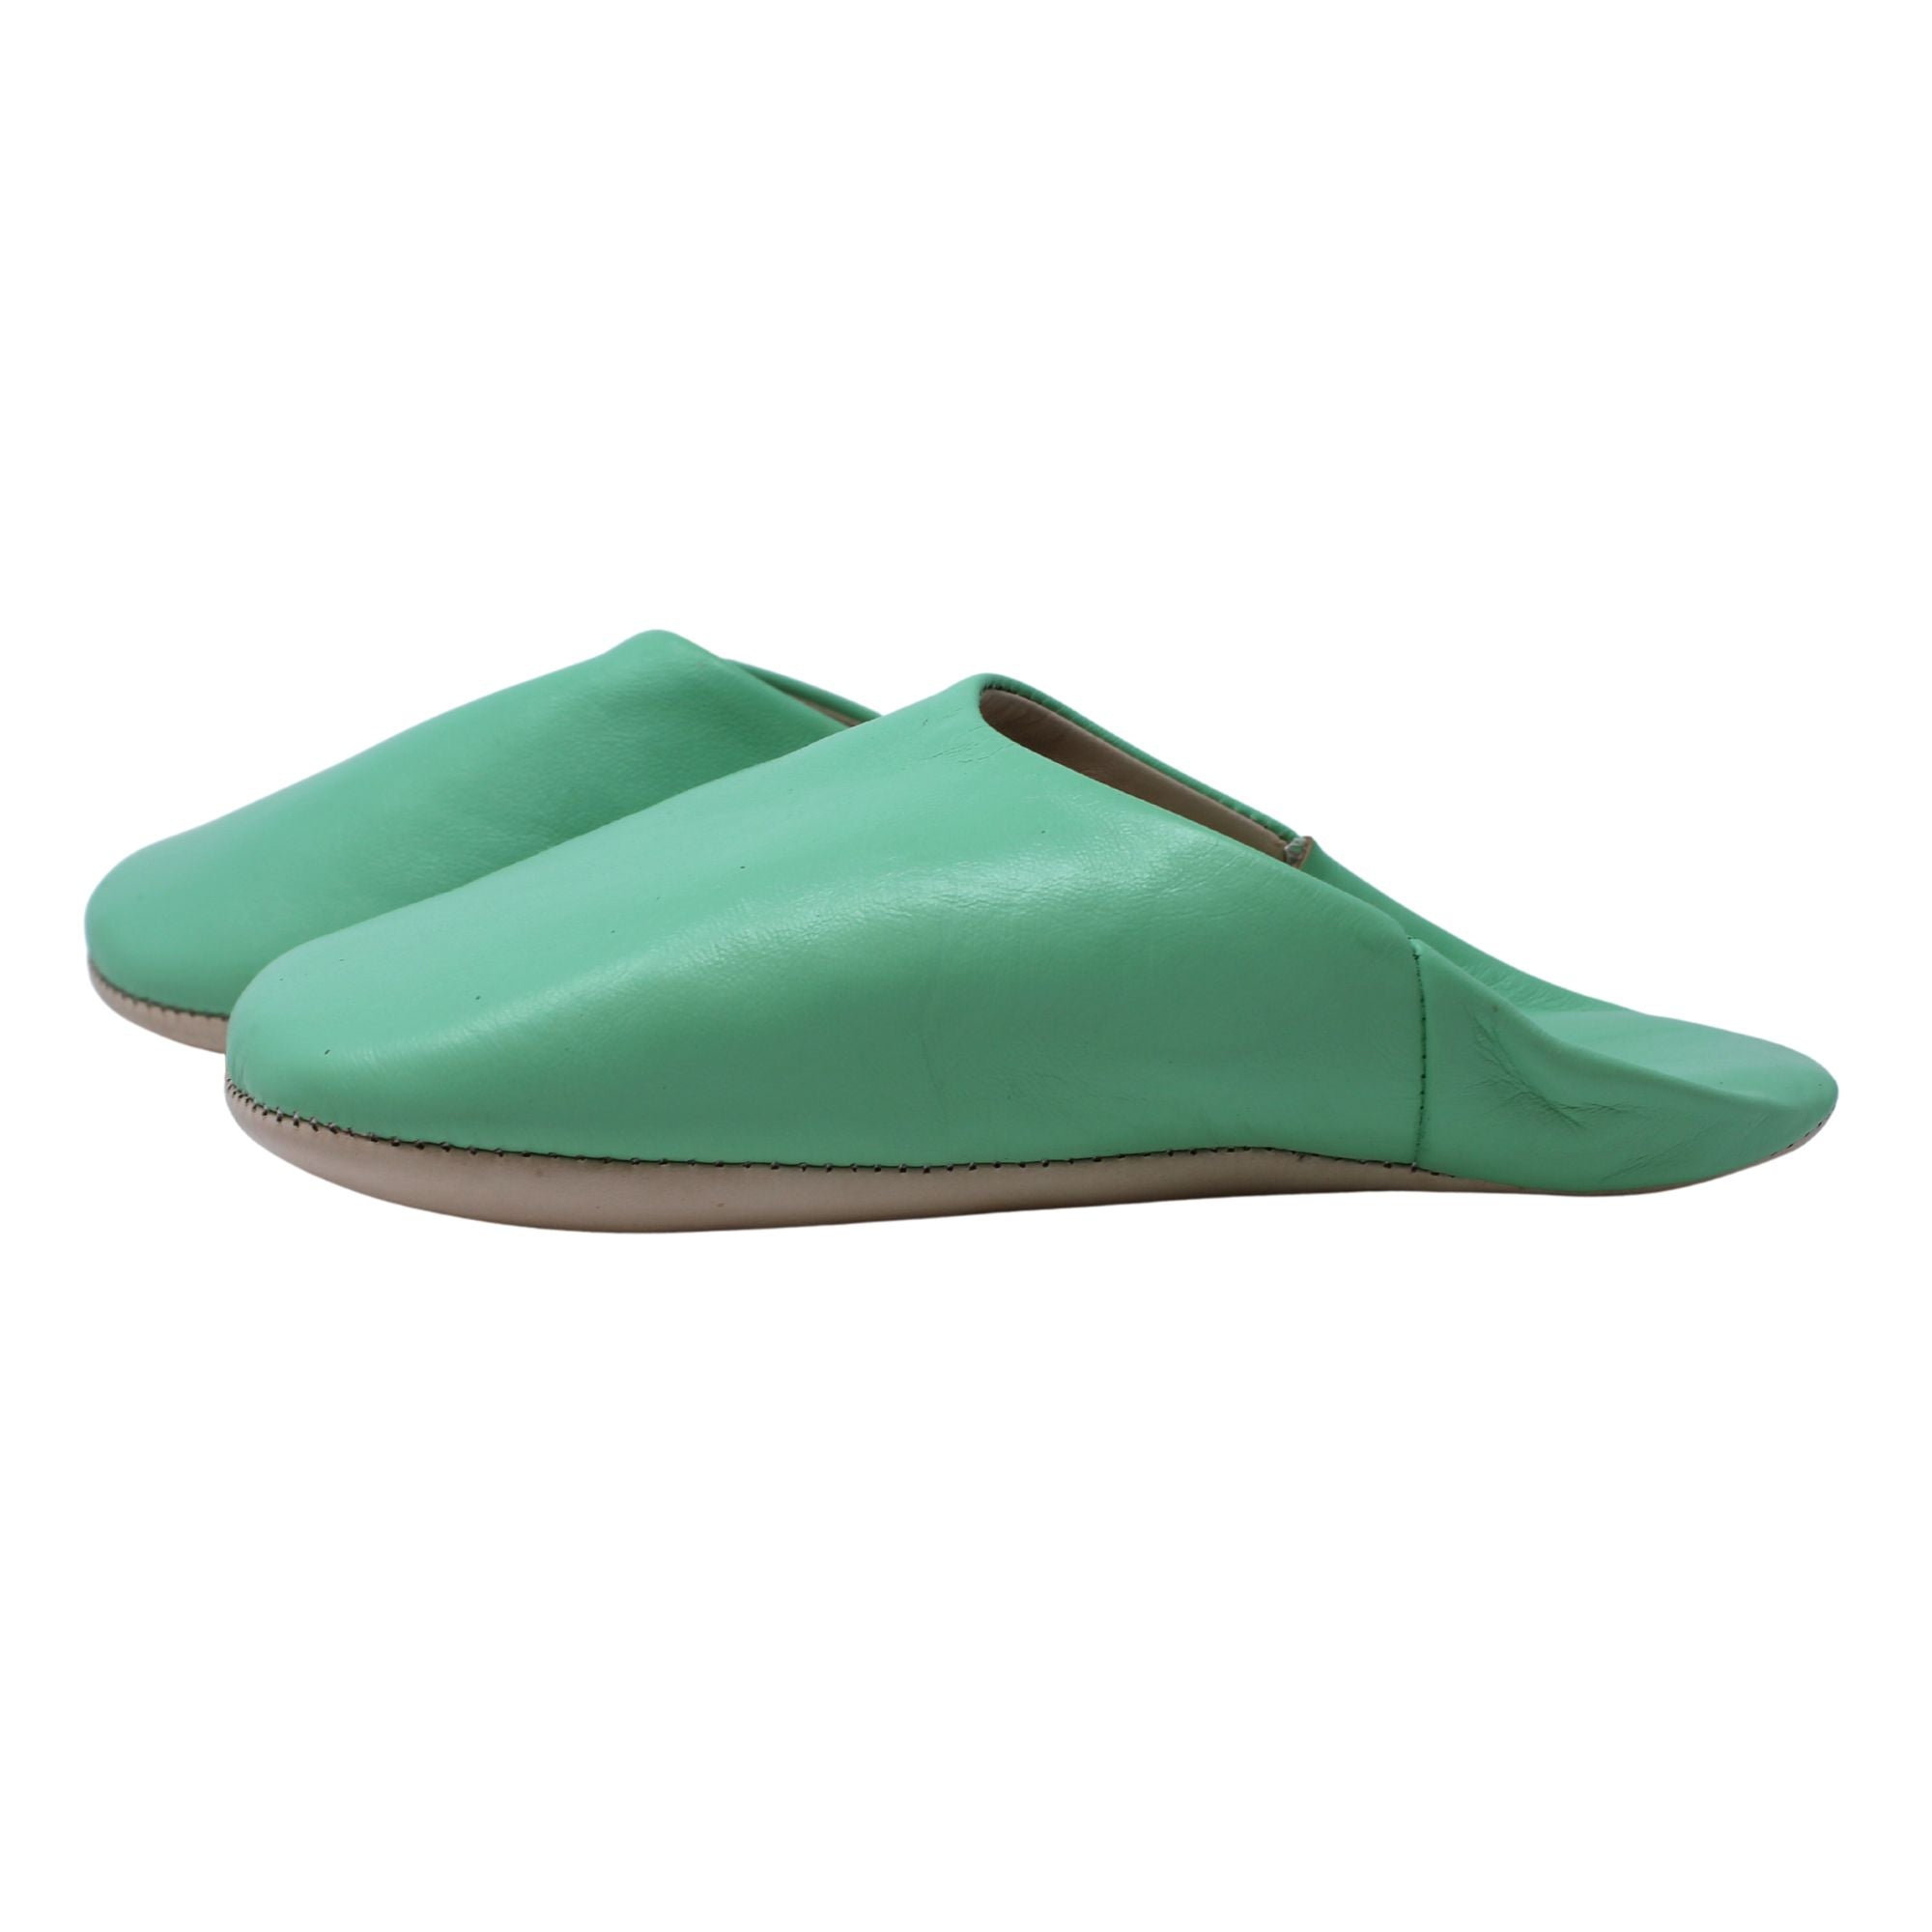 Women's leather slippers Sage Green - Artisan Stories